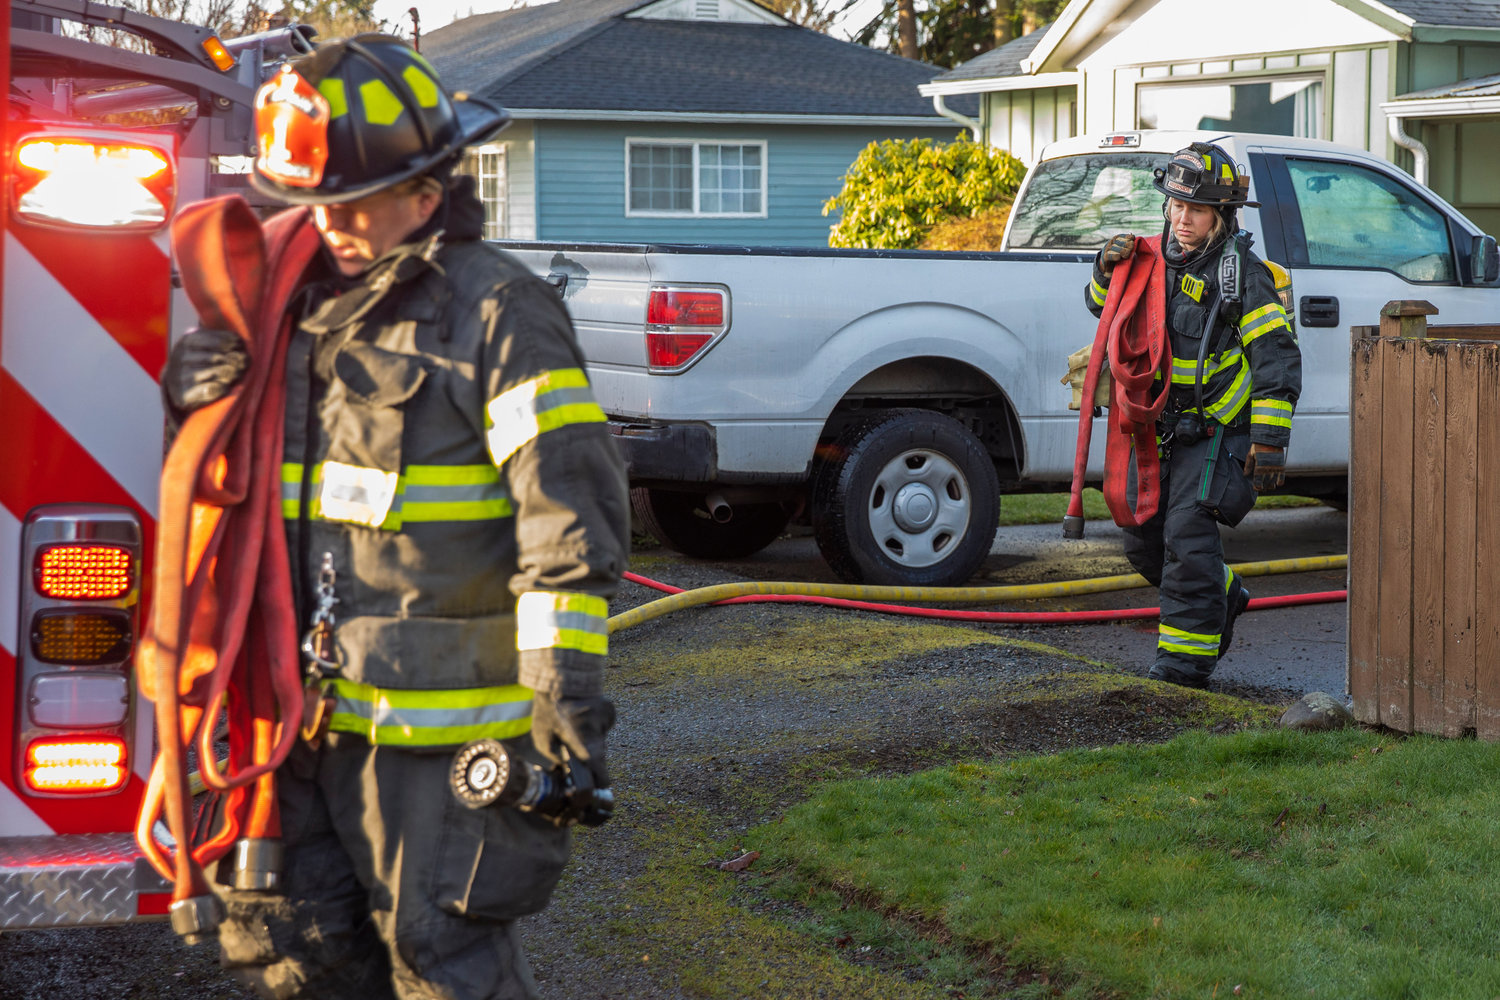 Crews from Riverside Fire Authority carry hoses along View Avenue in Centralia where a detached garage and items inside were damaged by flames Wednesday morning.